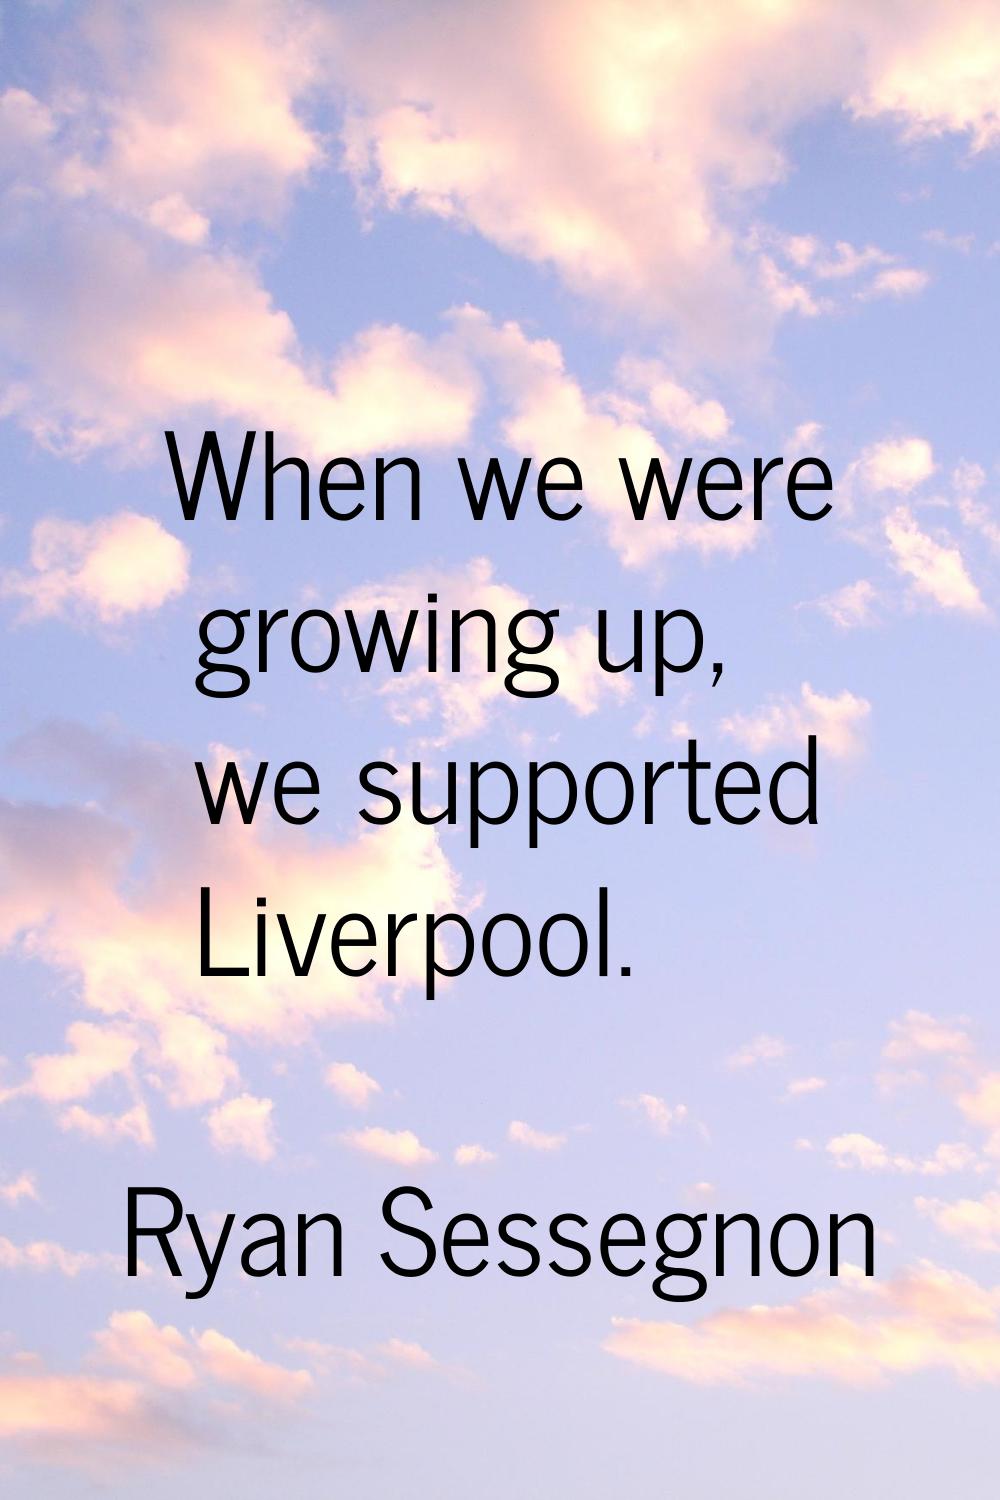 When we were growing up, we supported Liverpool.